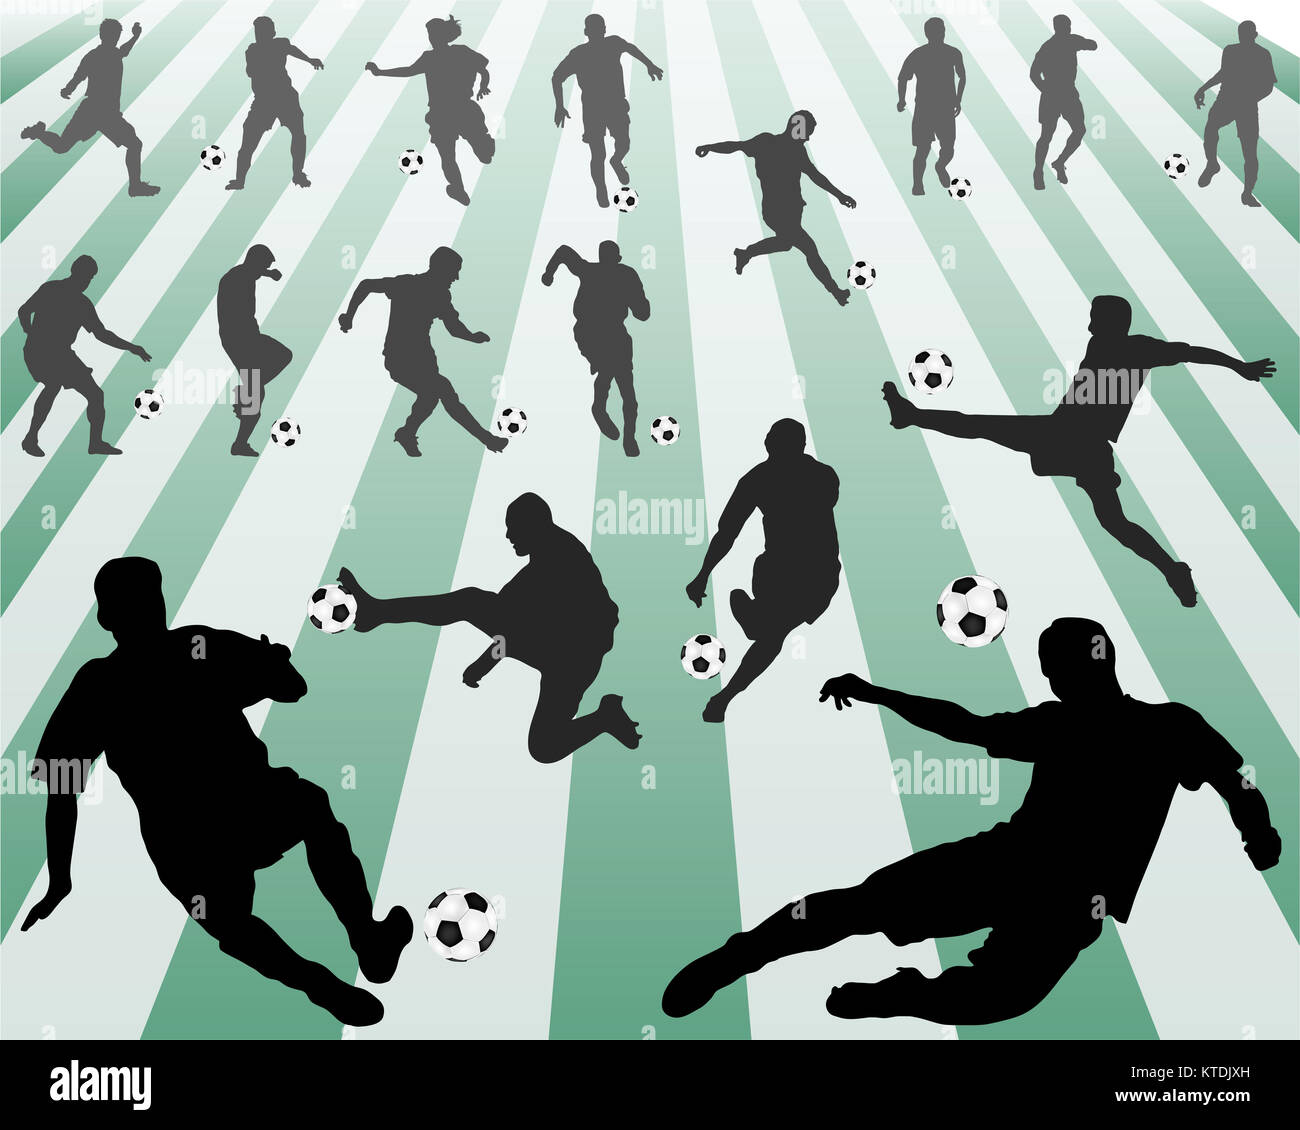 Black silhouettes of football players, vector illustration Stock Photo